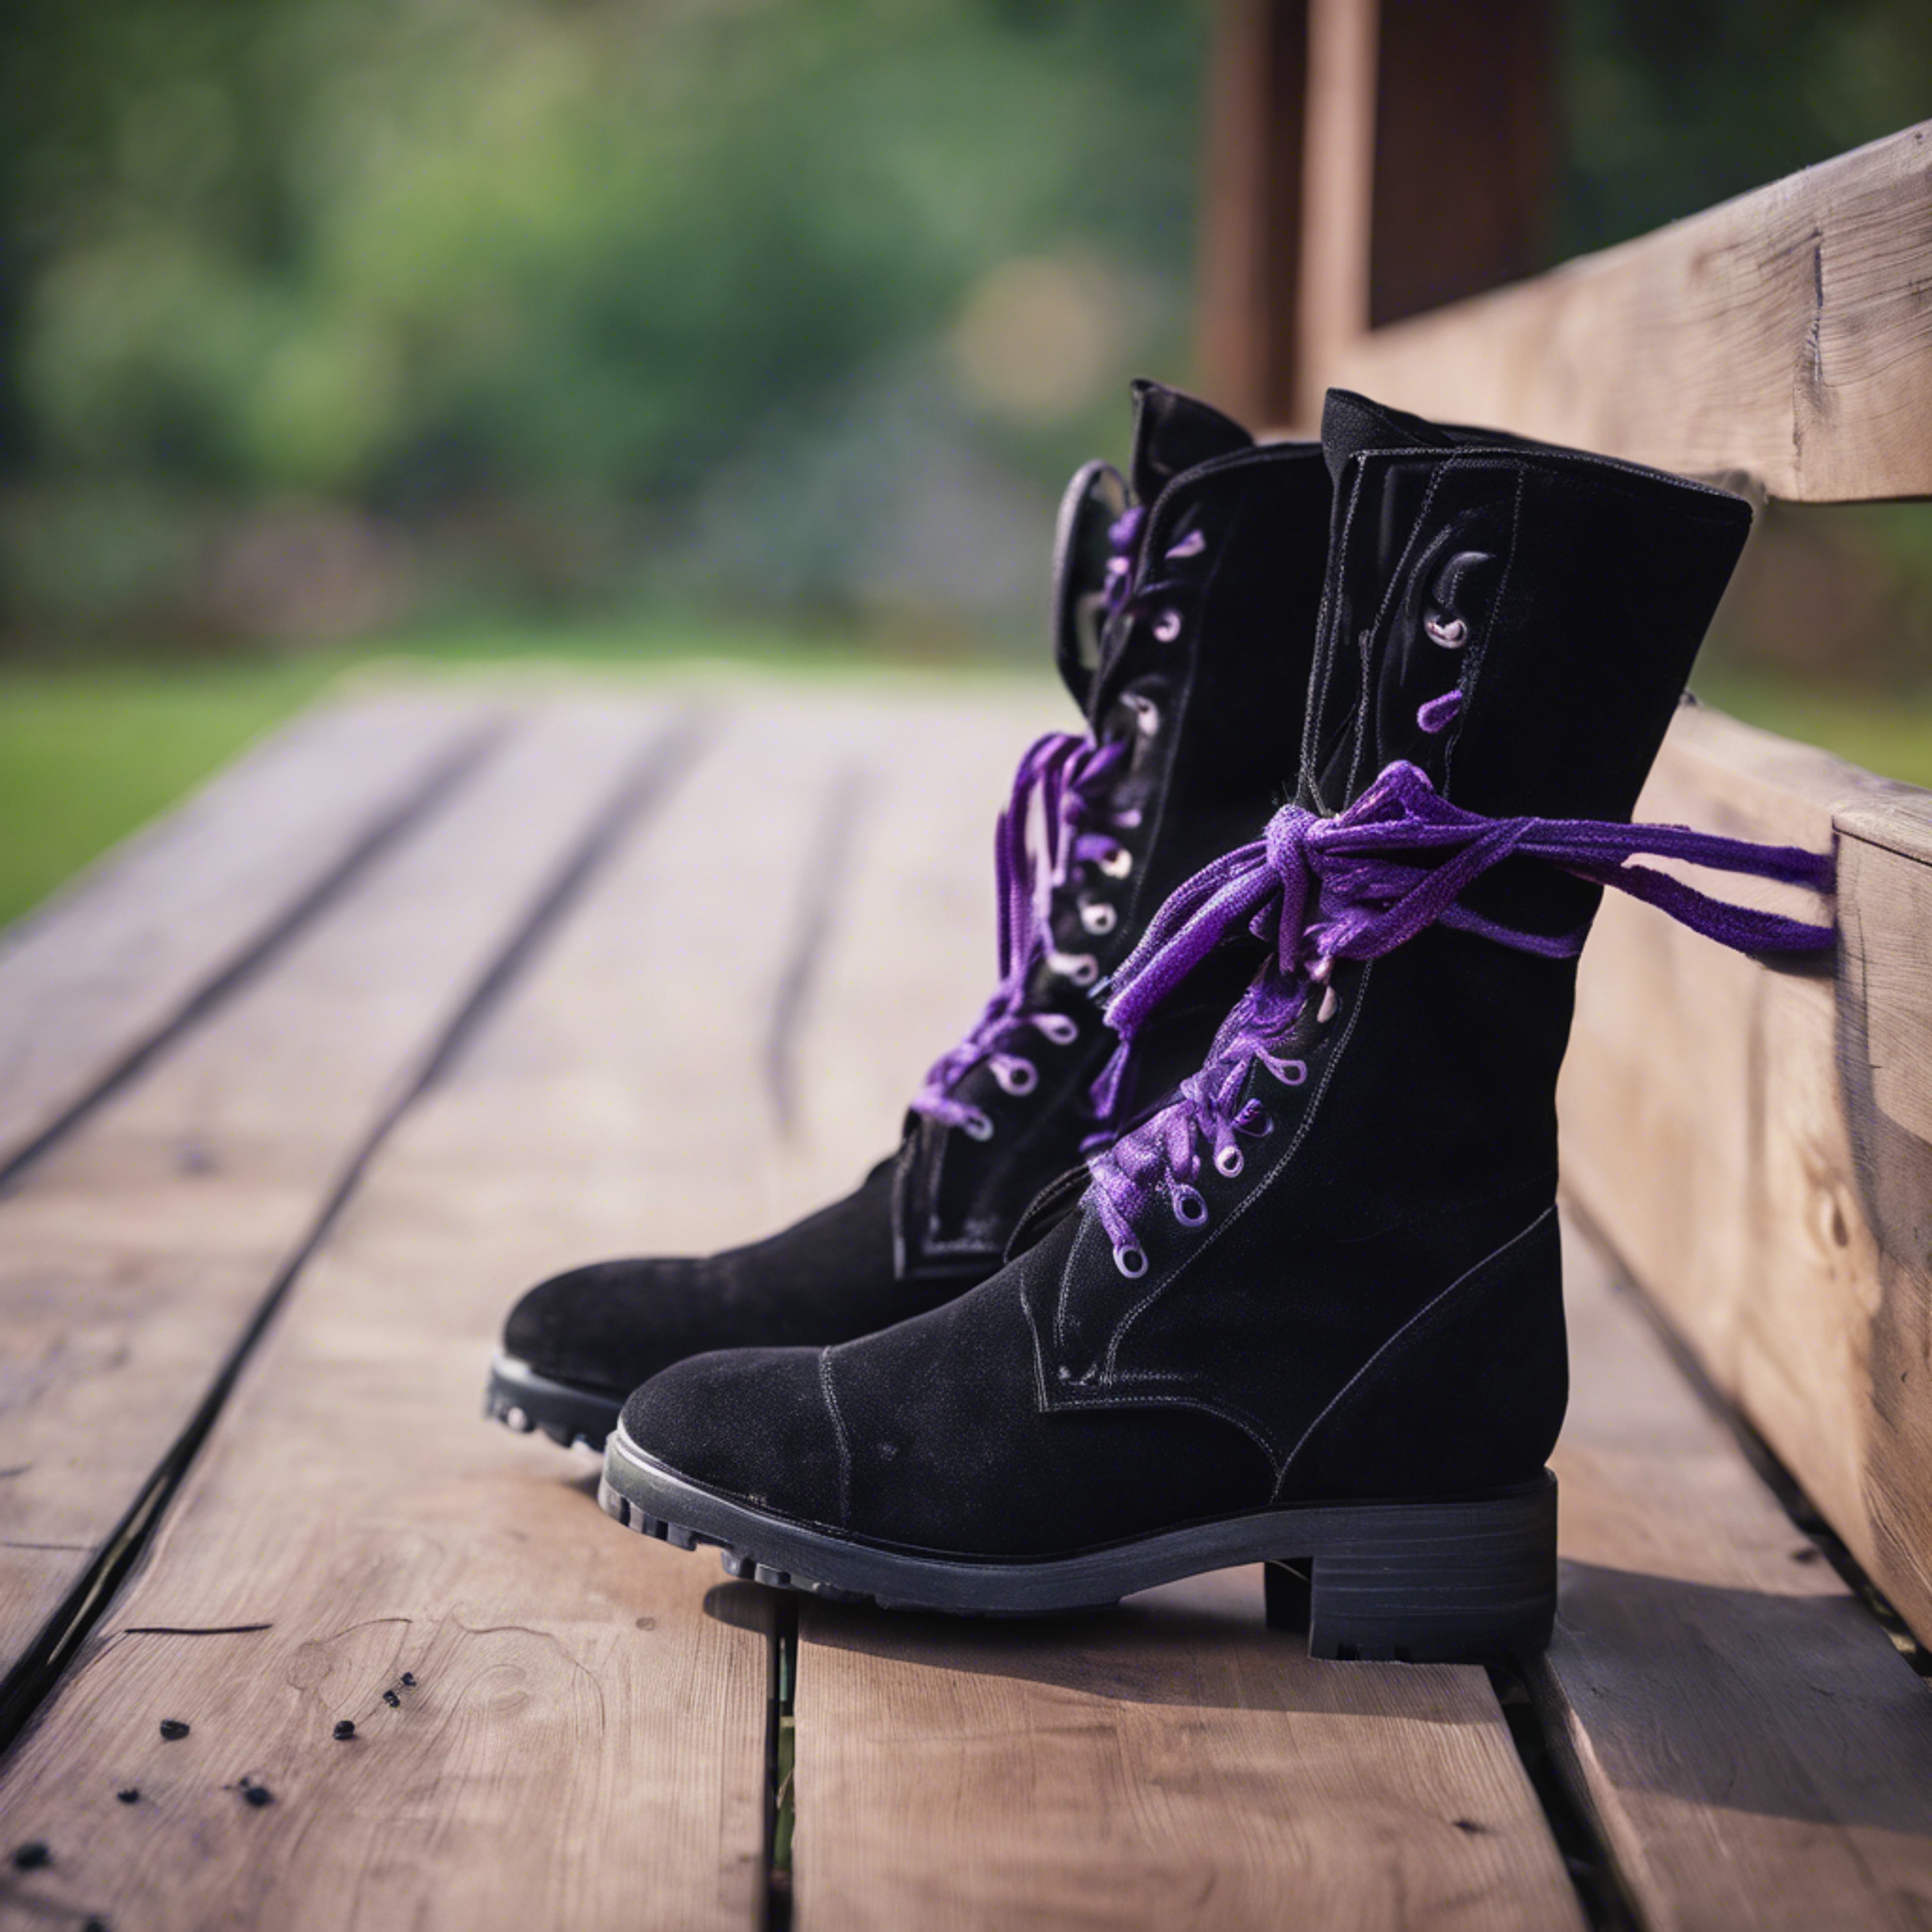 A pair of black suede boots with purple laces left casually on a wooden porch. 牆紙[fedd81ee4b6b40088ba0]